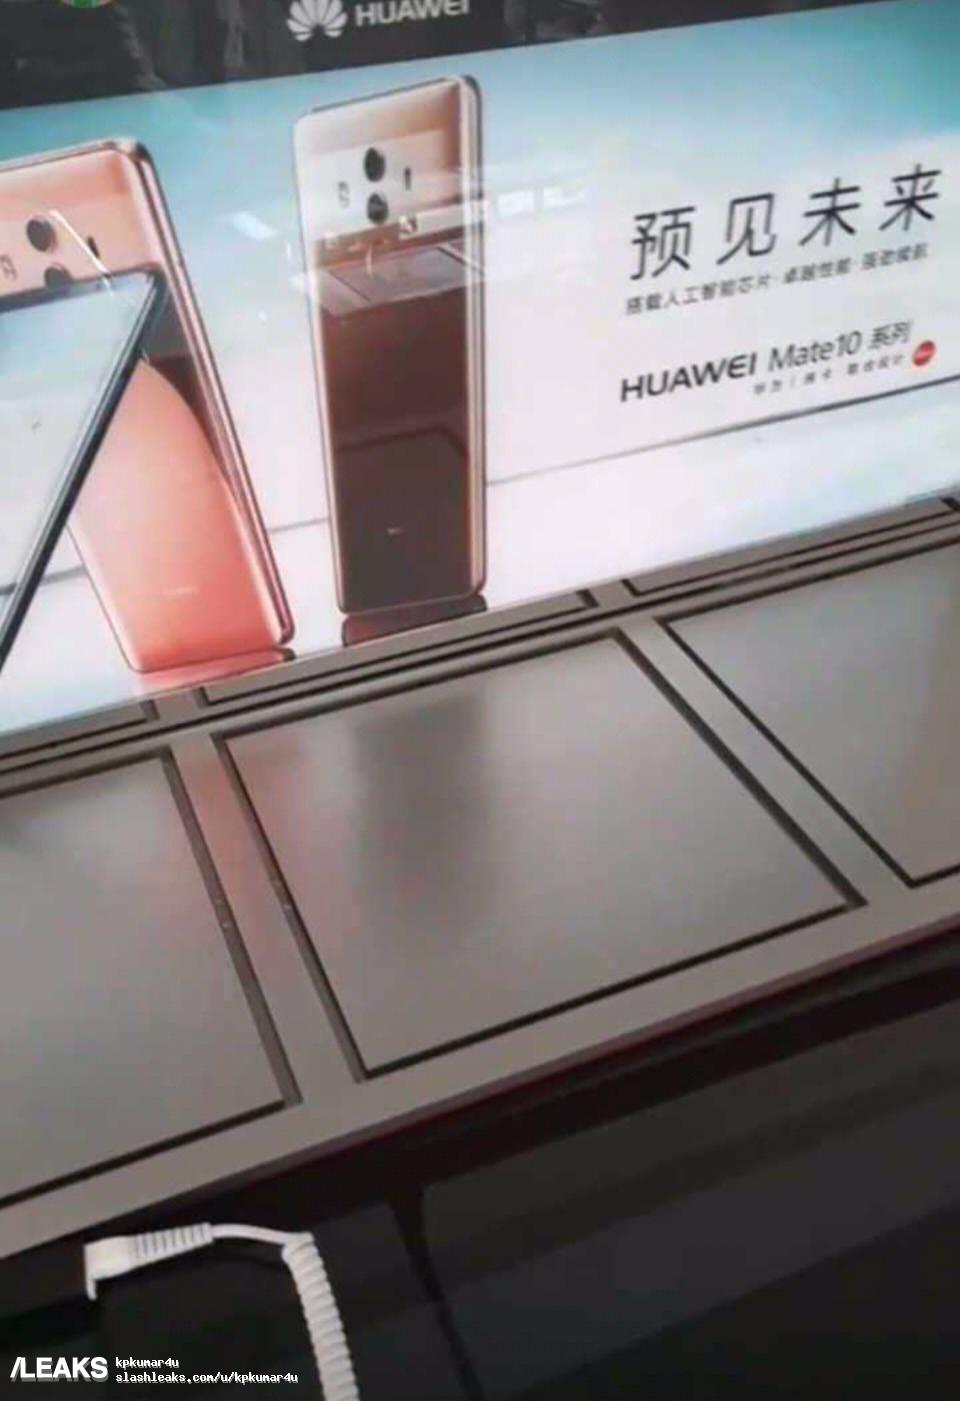 Huawei Mate 10 Pro Promotional Poster